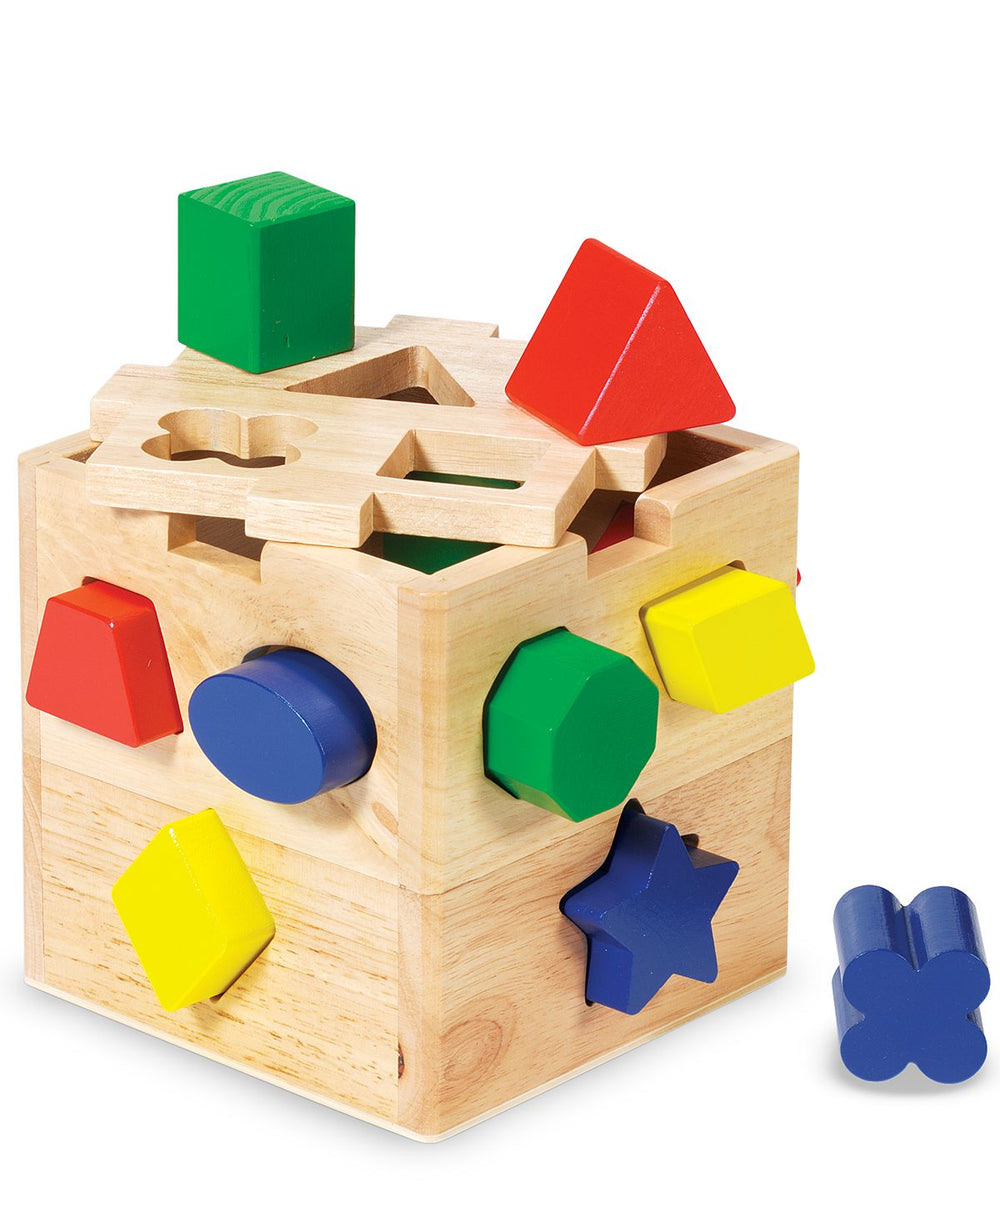 Melissa & Doug Shape Sorting Cube - Educational Classic Wooden Toy